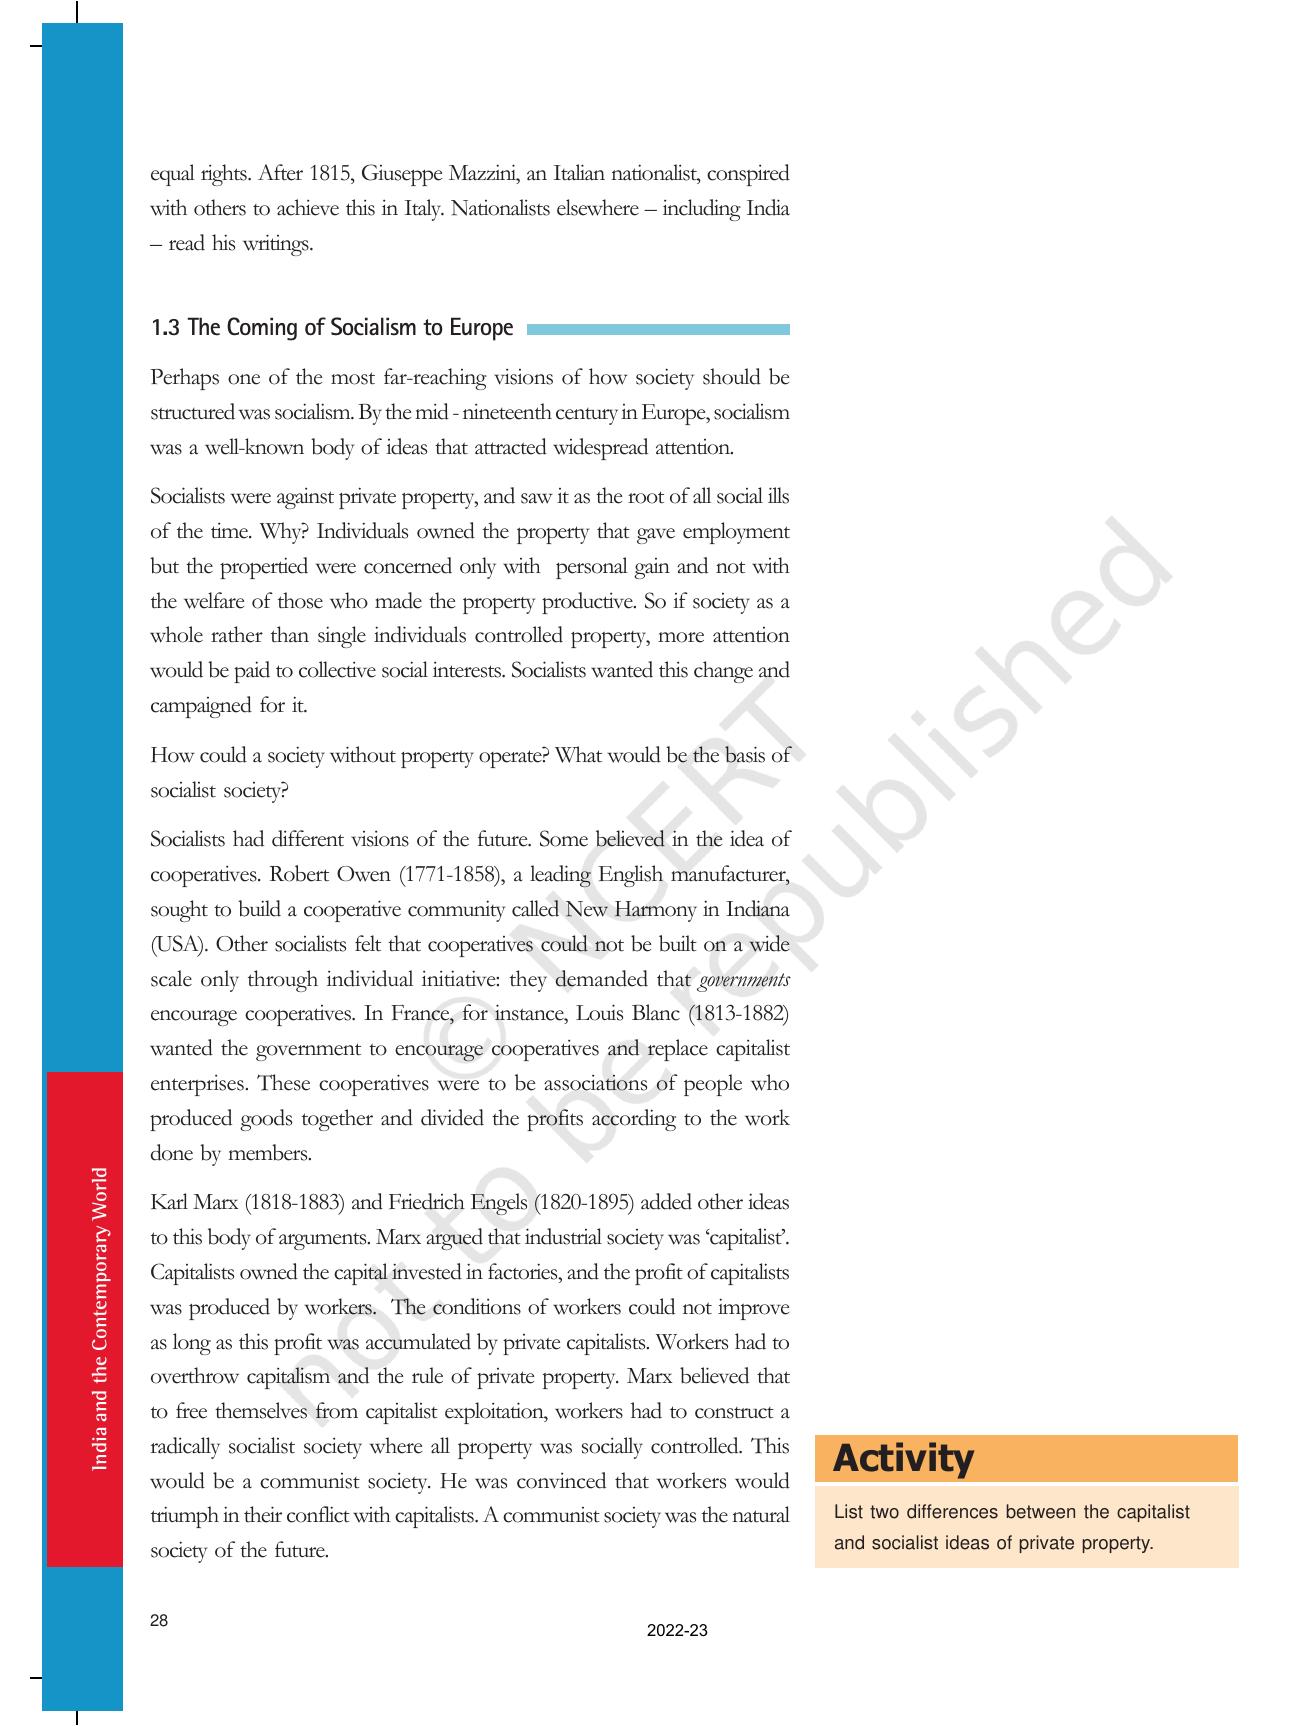 NCERT Book for Class 9 History Chapter 2 Socialism in Europe and the Russian Revolution - Page 4